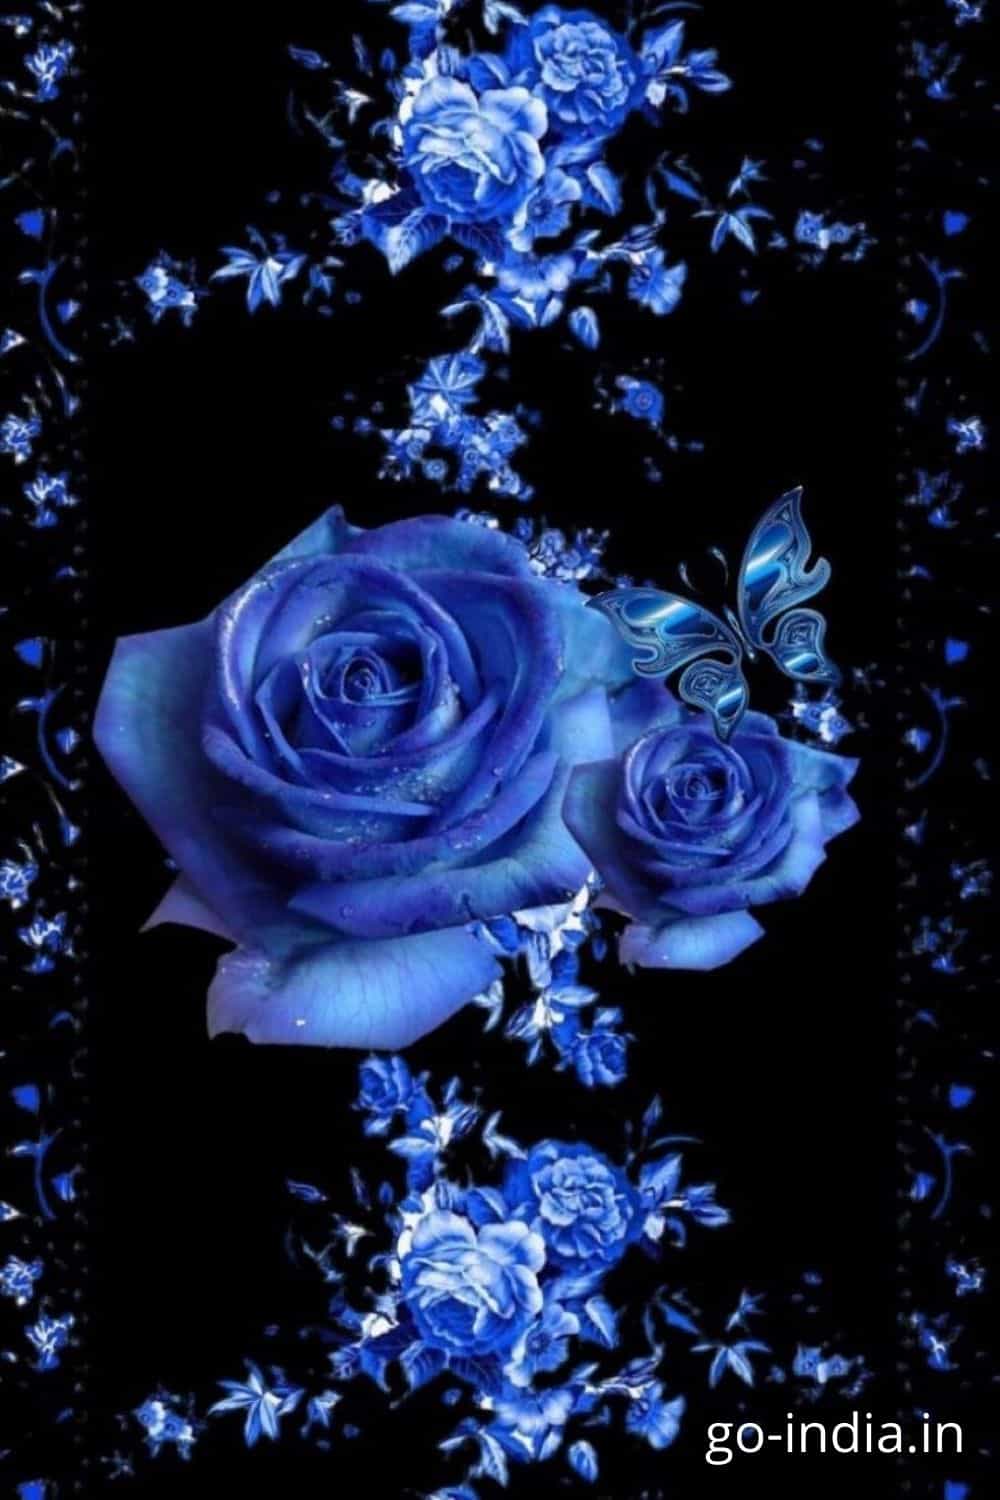 150+ Best Blue Rose Wallpaper, Images and Photos : For a Perfect Romantic Bond